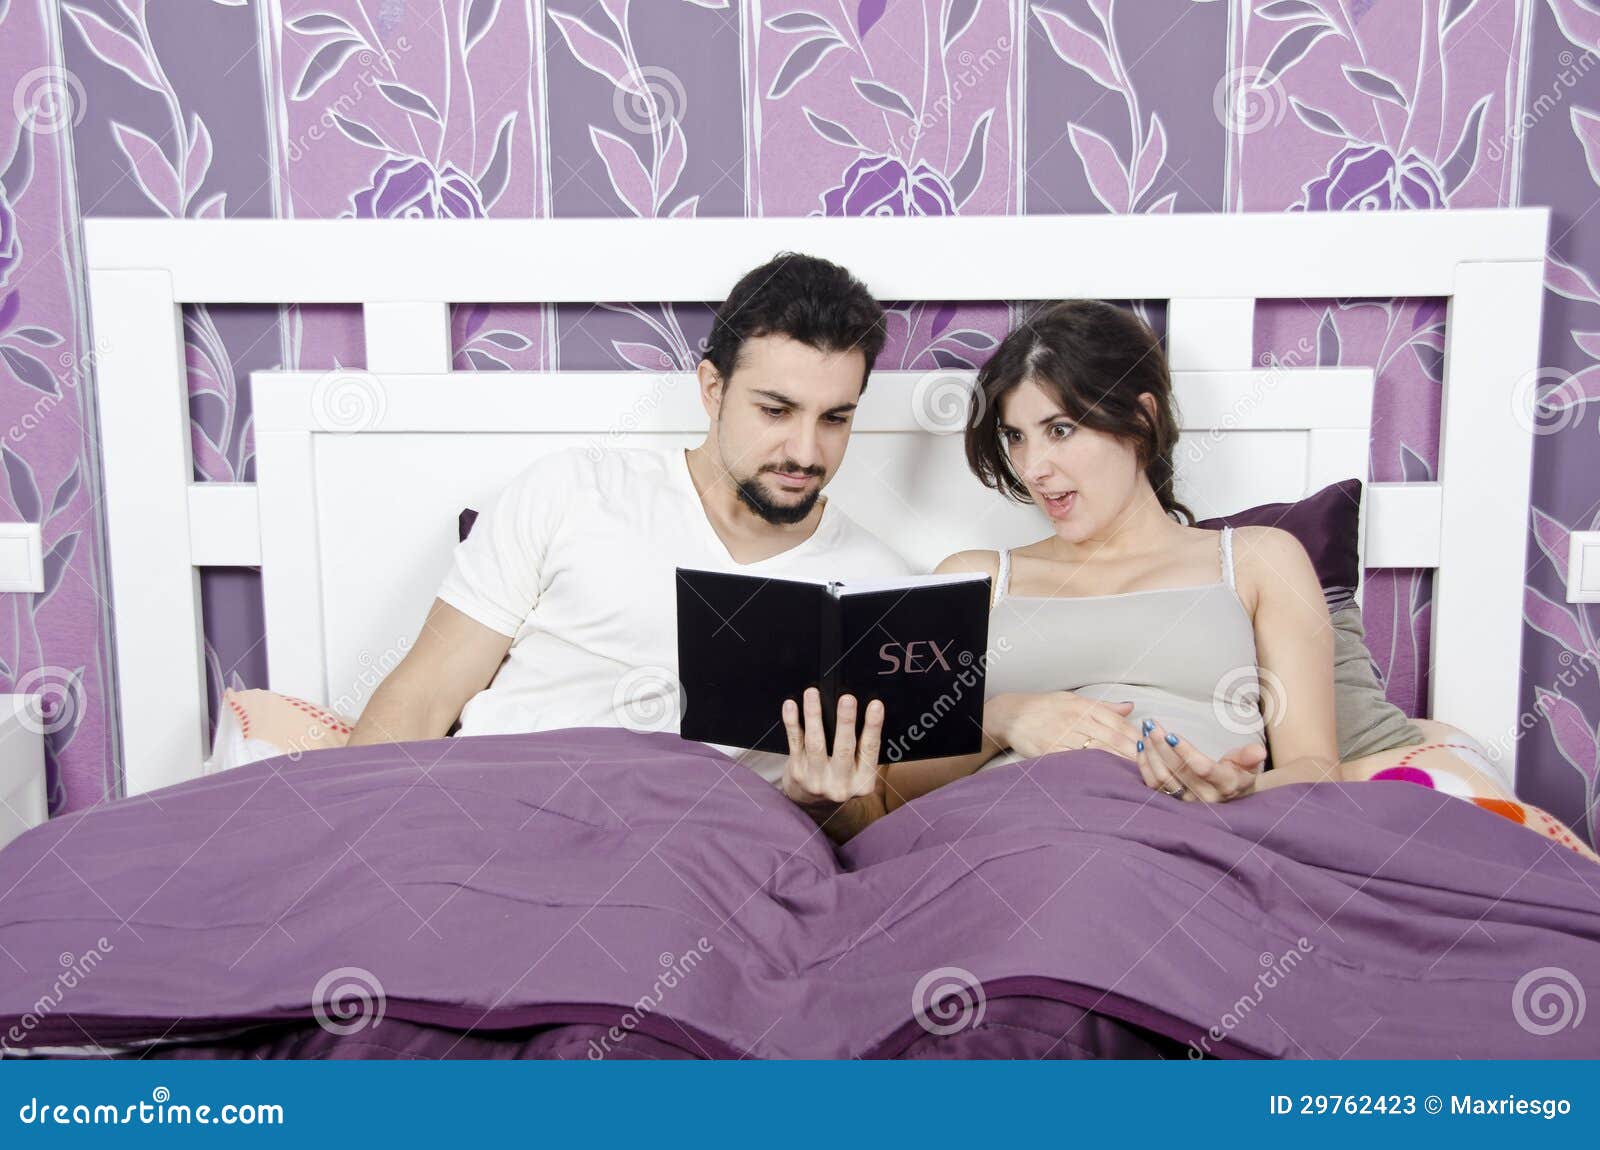 Sex Book for Novice Couples Stock Image pic